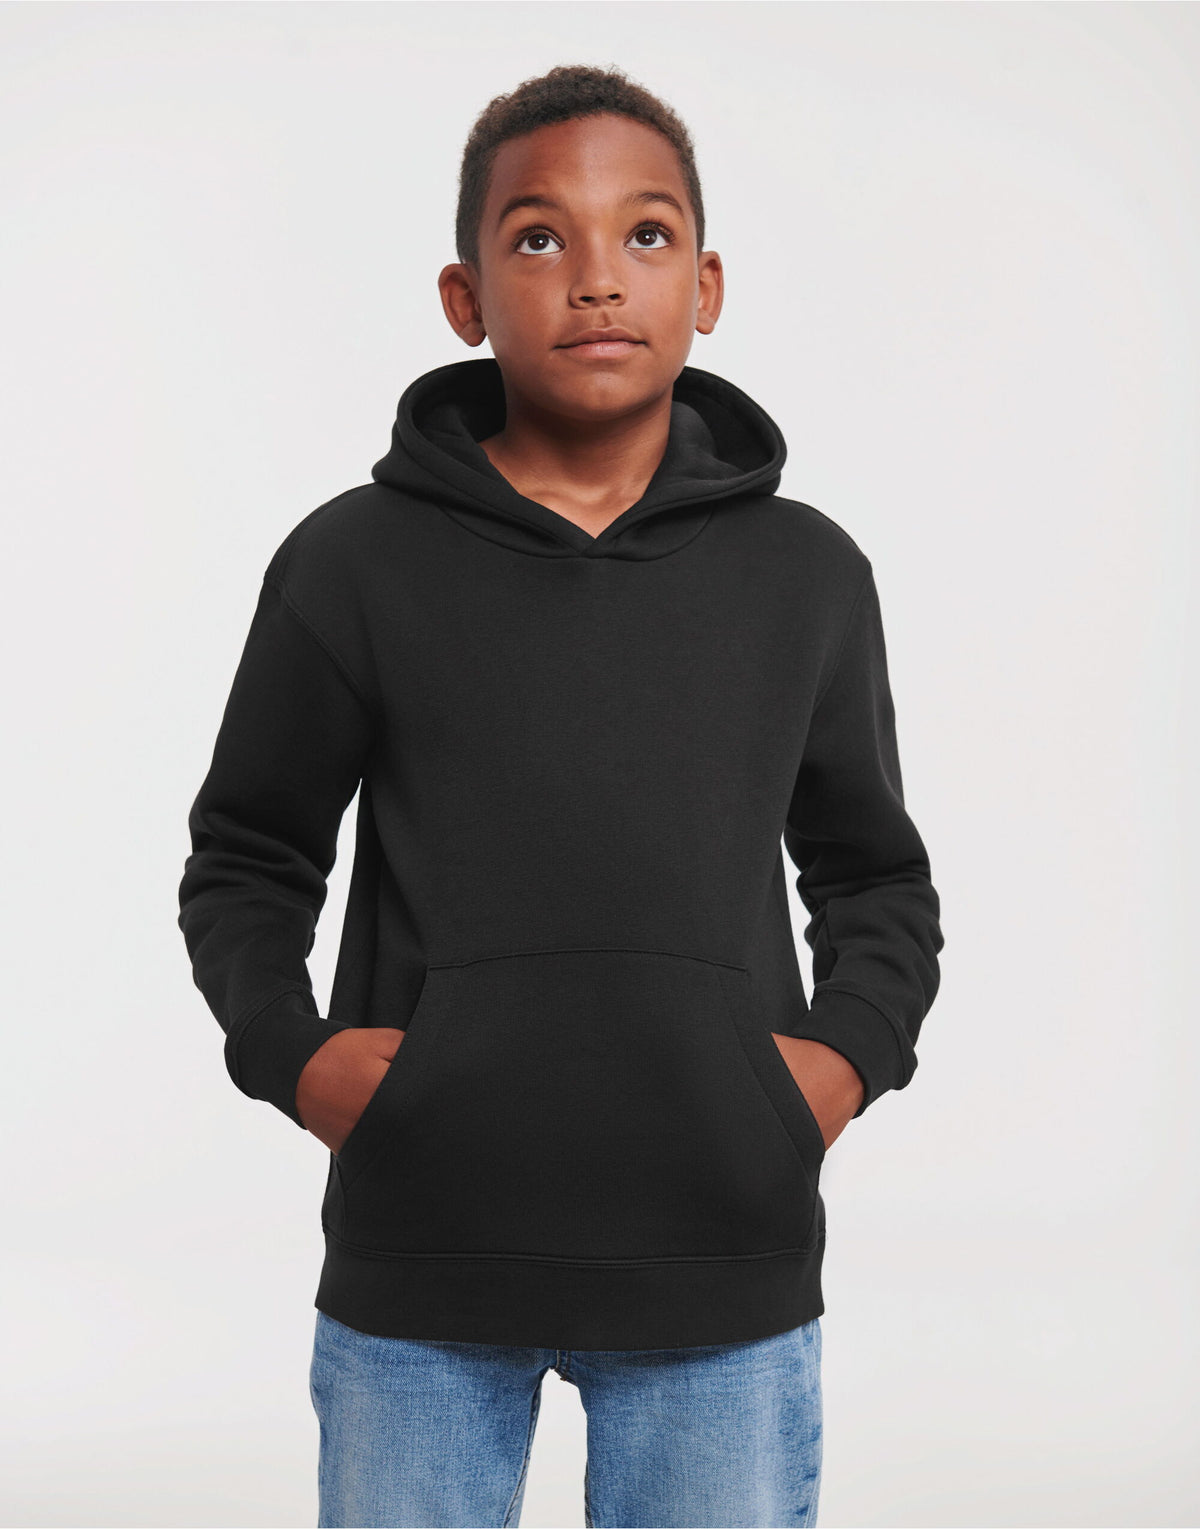 Russell Kids Authentic Hooded Sweat